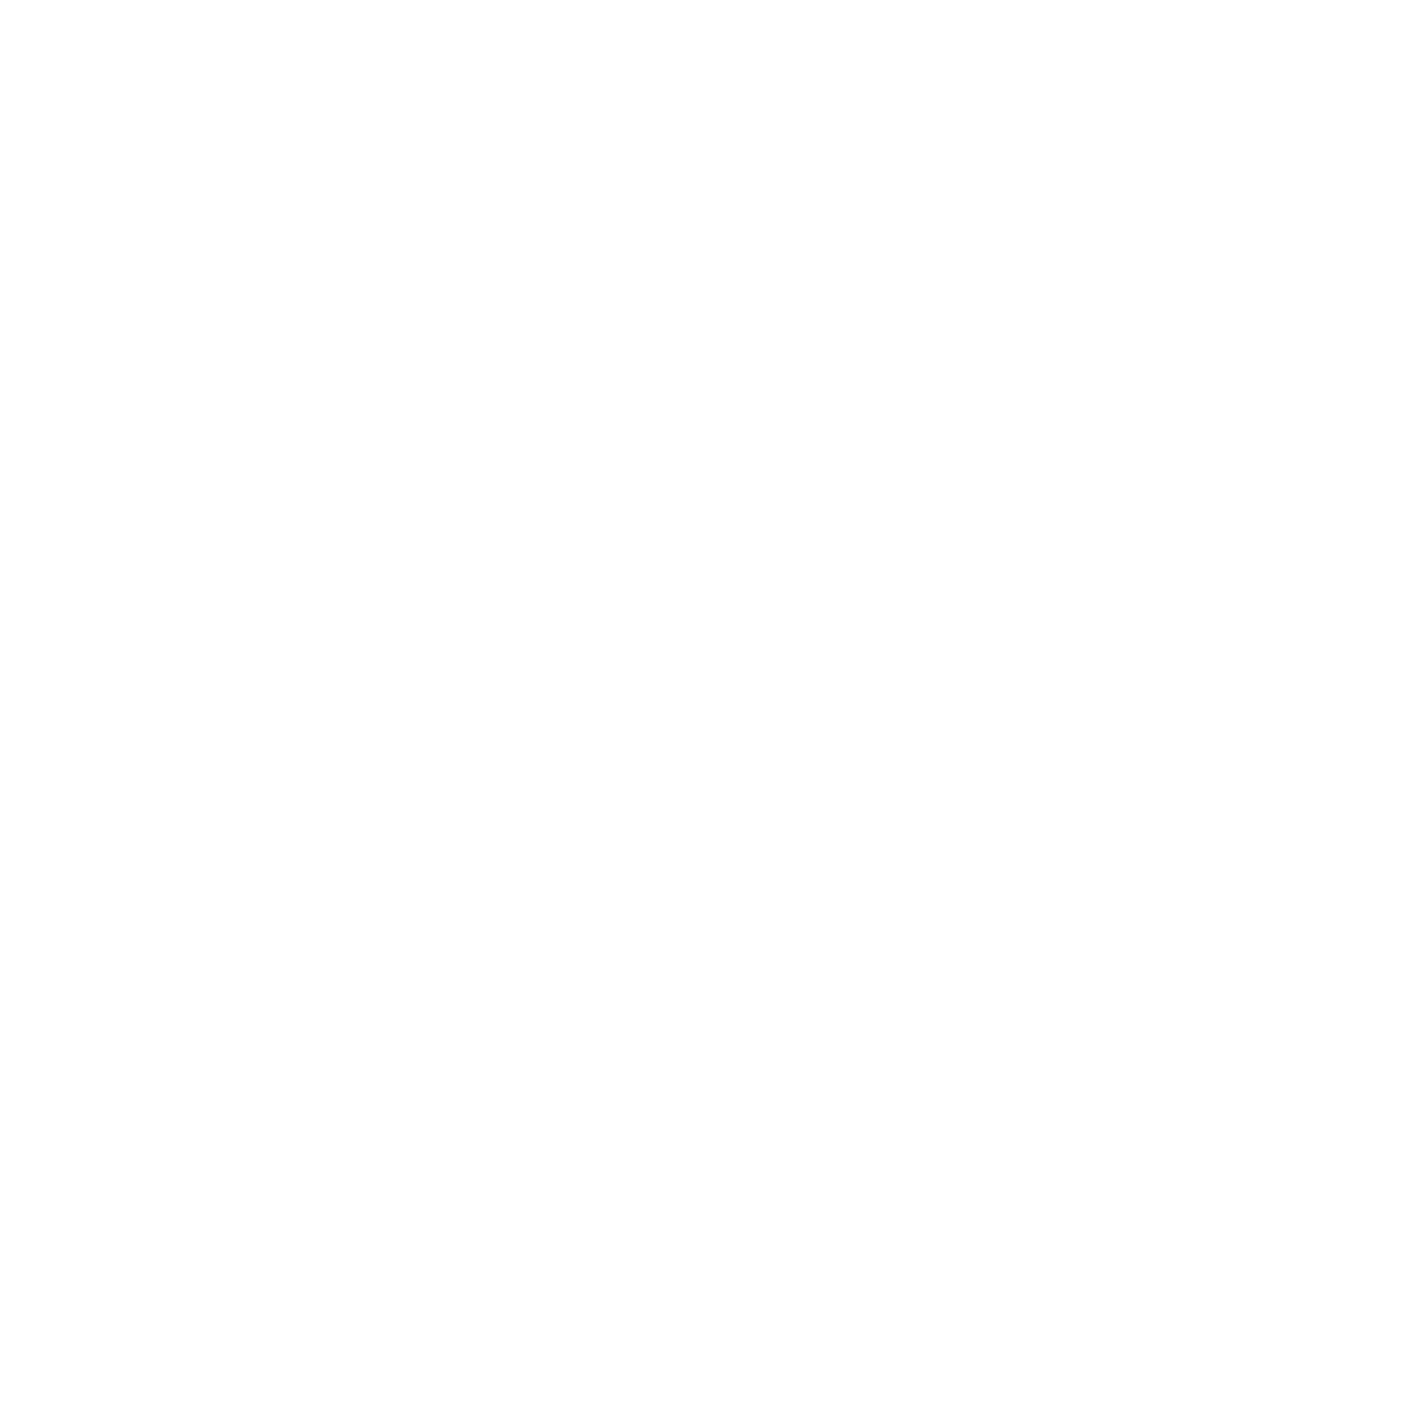 icon group containing a post-consumer recycled plastic icon, a FSC Certified packaging icon, an Always cruelty-free jumping bunny icon, and an eco-friendly ingredients icon